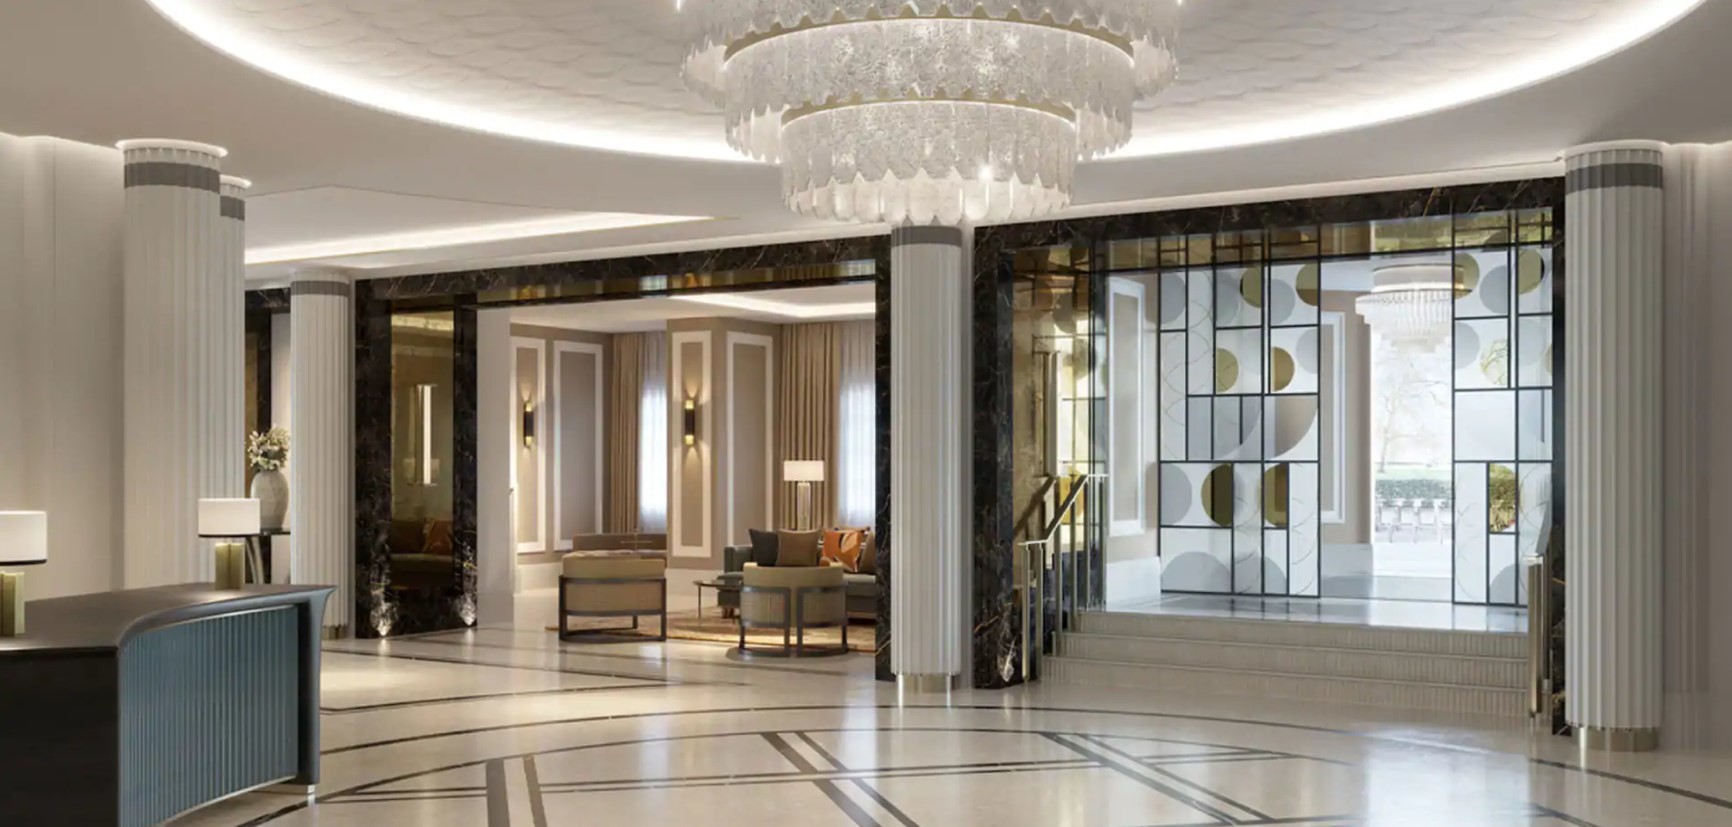 news-main-hilton-luxury-brands-to-open-seven-hotels-by-end-of-2019.1563274843.jpg